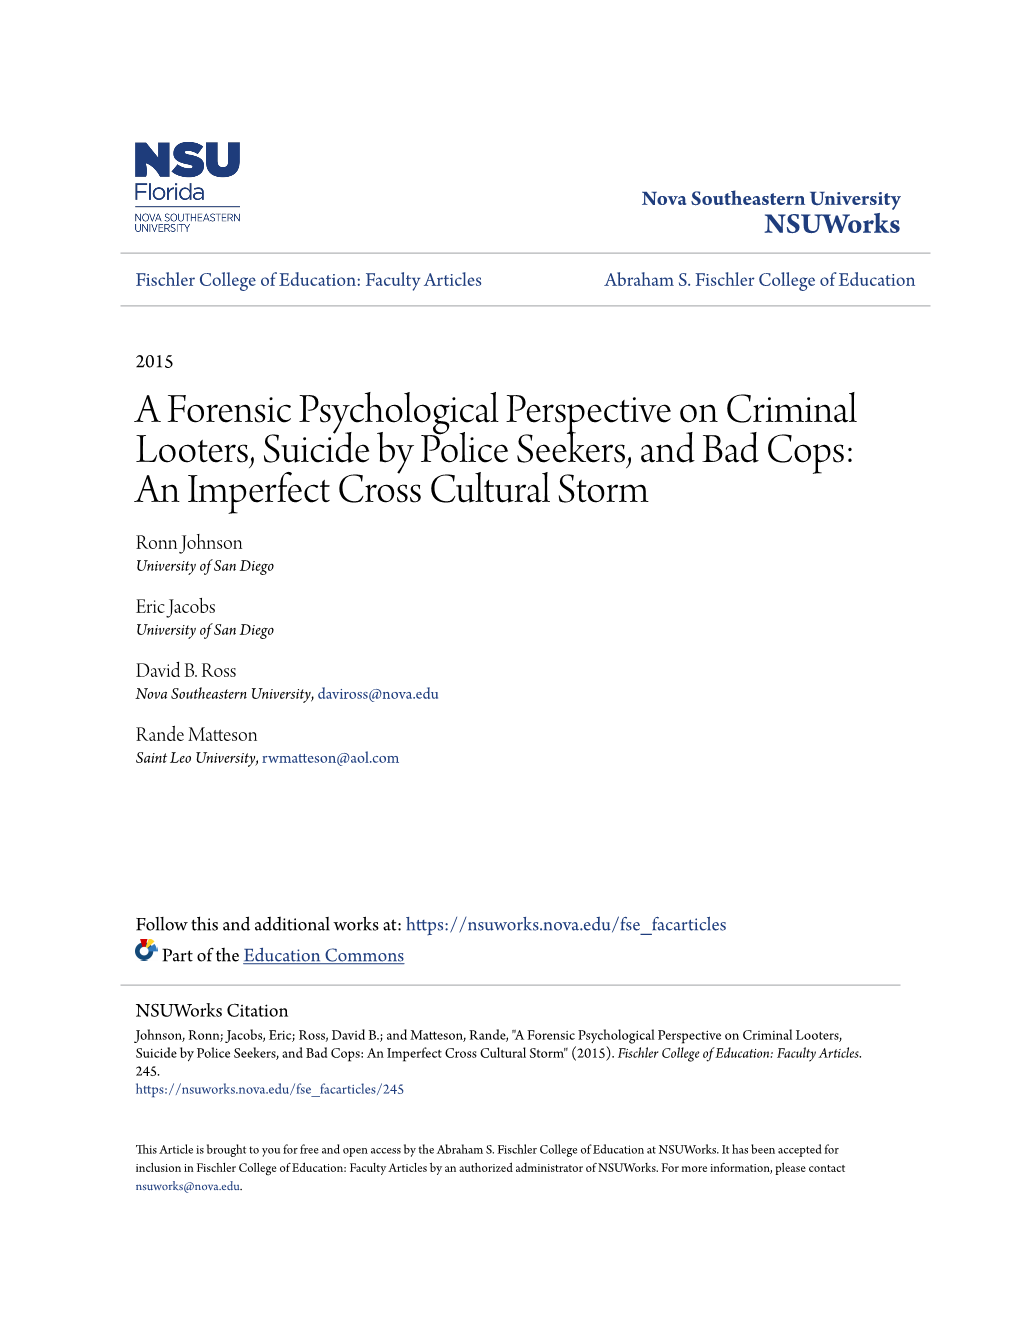 A Forensic Psychological Perspective on Criminal Looters, Suicide By